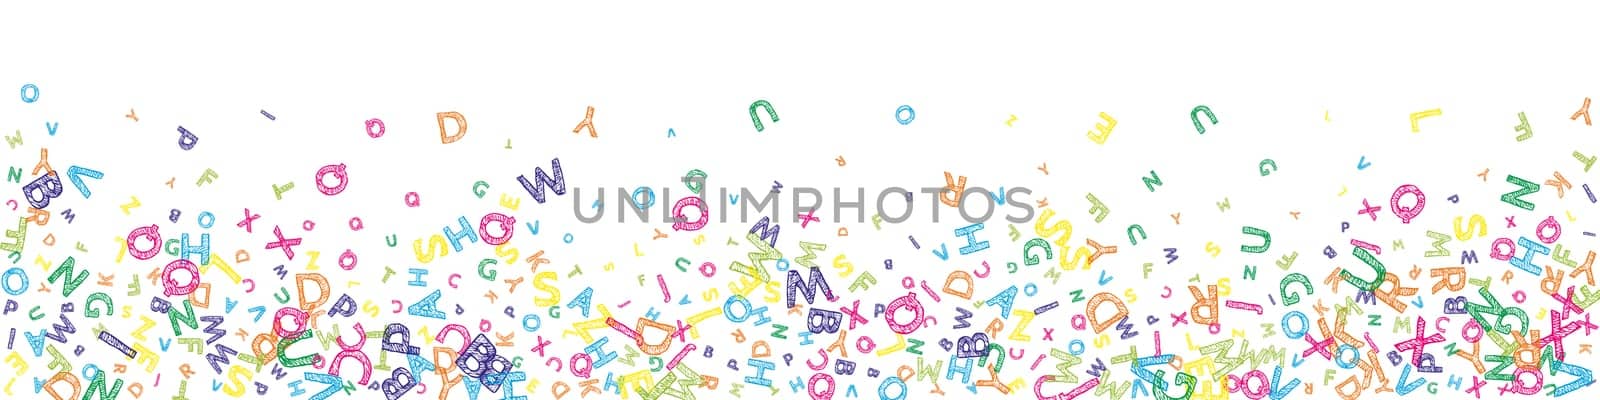 Falling letters of English language. Colorful messy sketch flying words of Latin alphabet. Foreign languages study concept. Exotic back to school banner on white background.